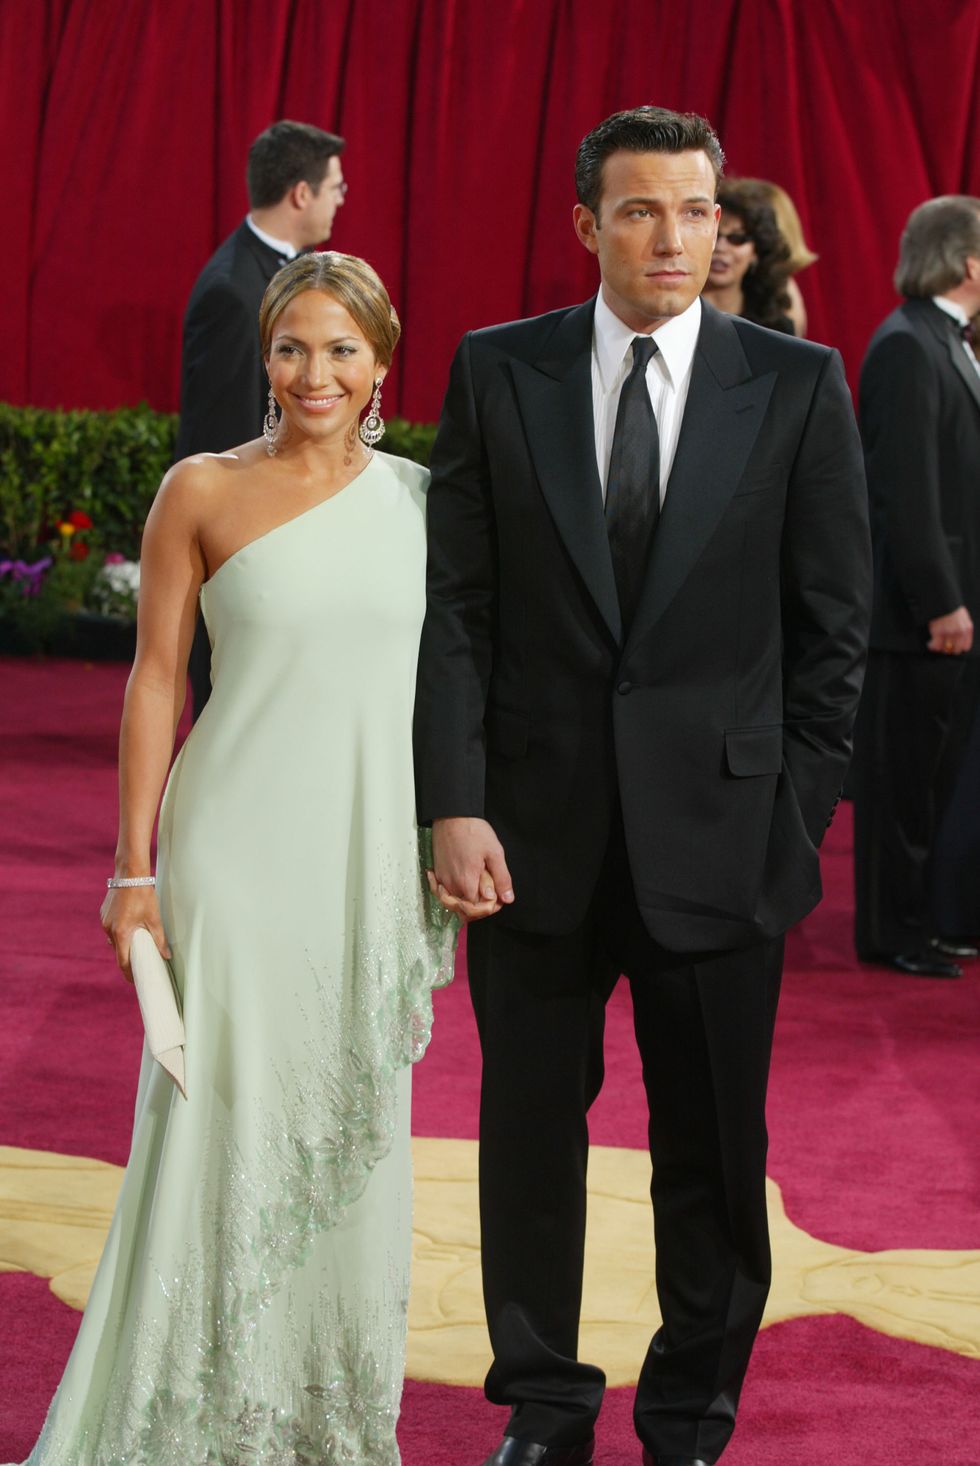 hollywood march 23 actress jennifer lopez, wearing harry winston jewelry, and actor ben affleck attend the 75th annual academy awards at the kodak theater on march 23, 2003 in hollywood, california photo by kevin wintergetty images